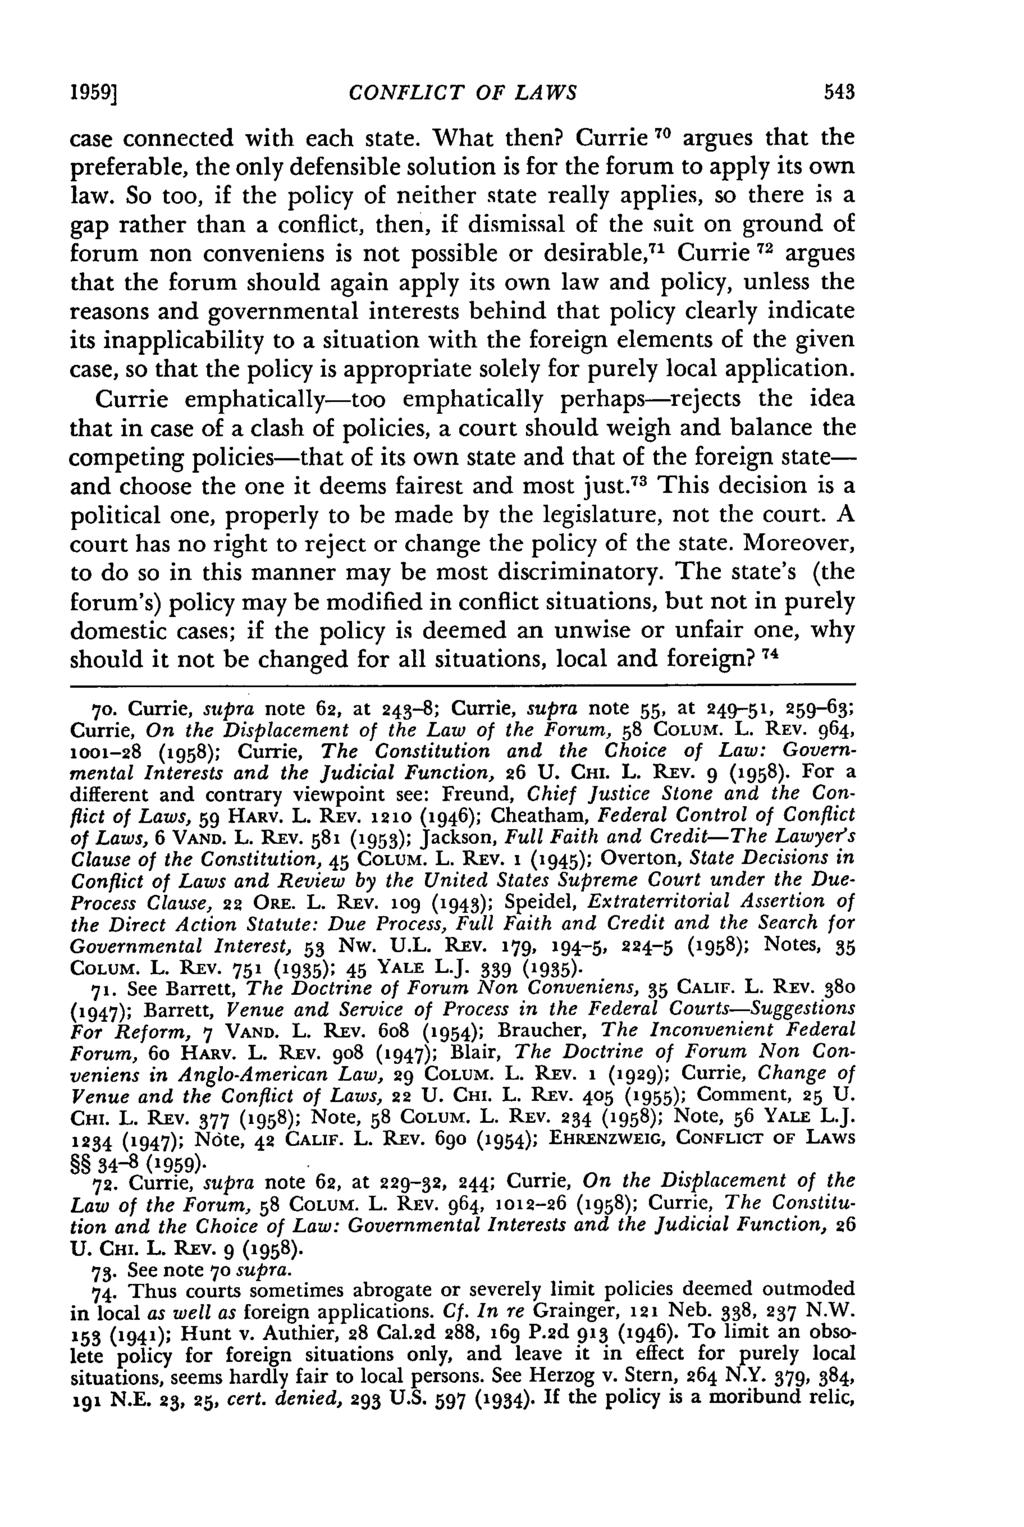 1959] CONFLICT OF LAWS case connected with each state. What then? Currie 70 argues that the preferable, the only defensible solution is for the forum to apply its own law.